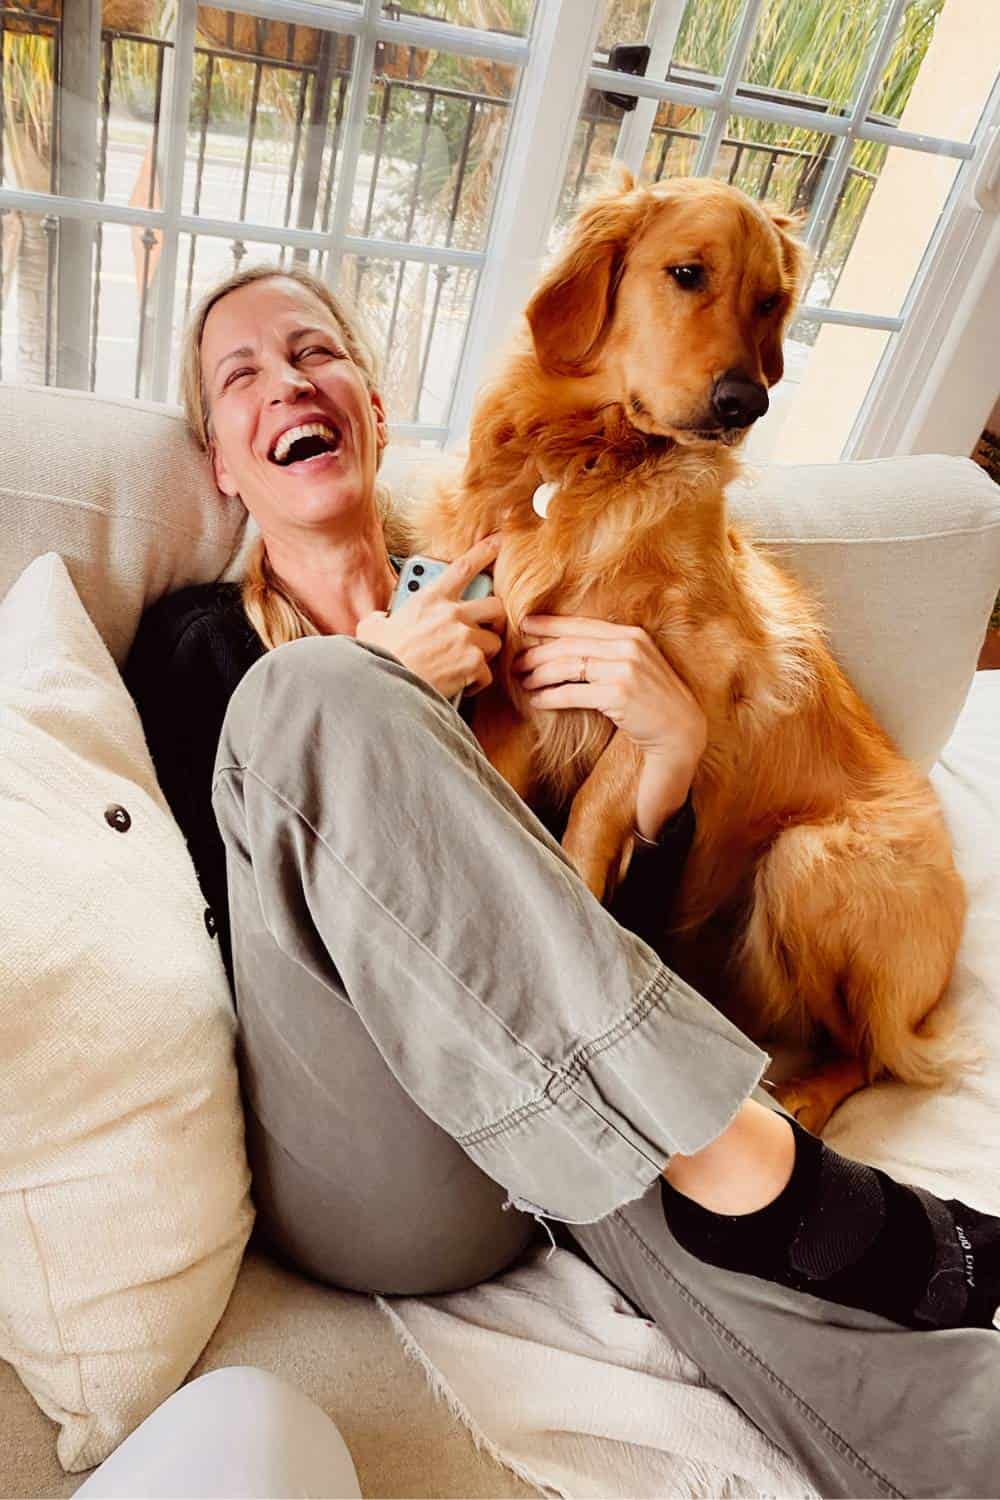 dawn laughing with a big dog on her lap